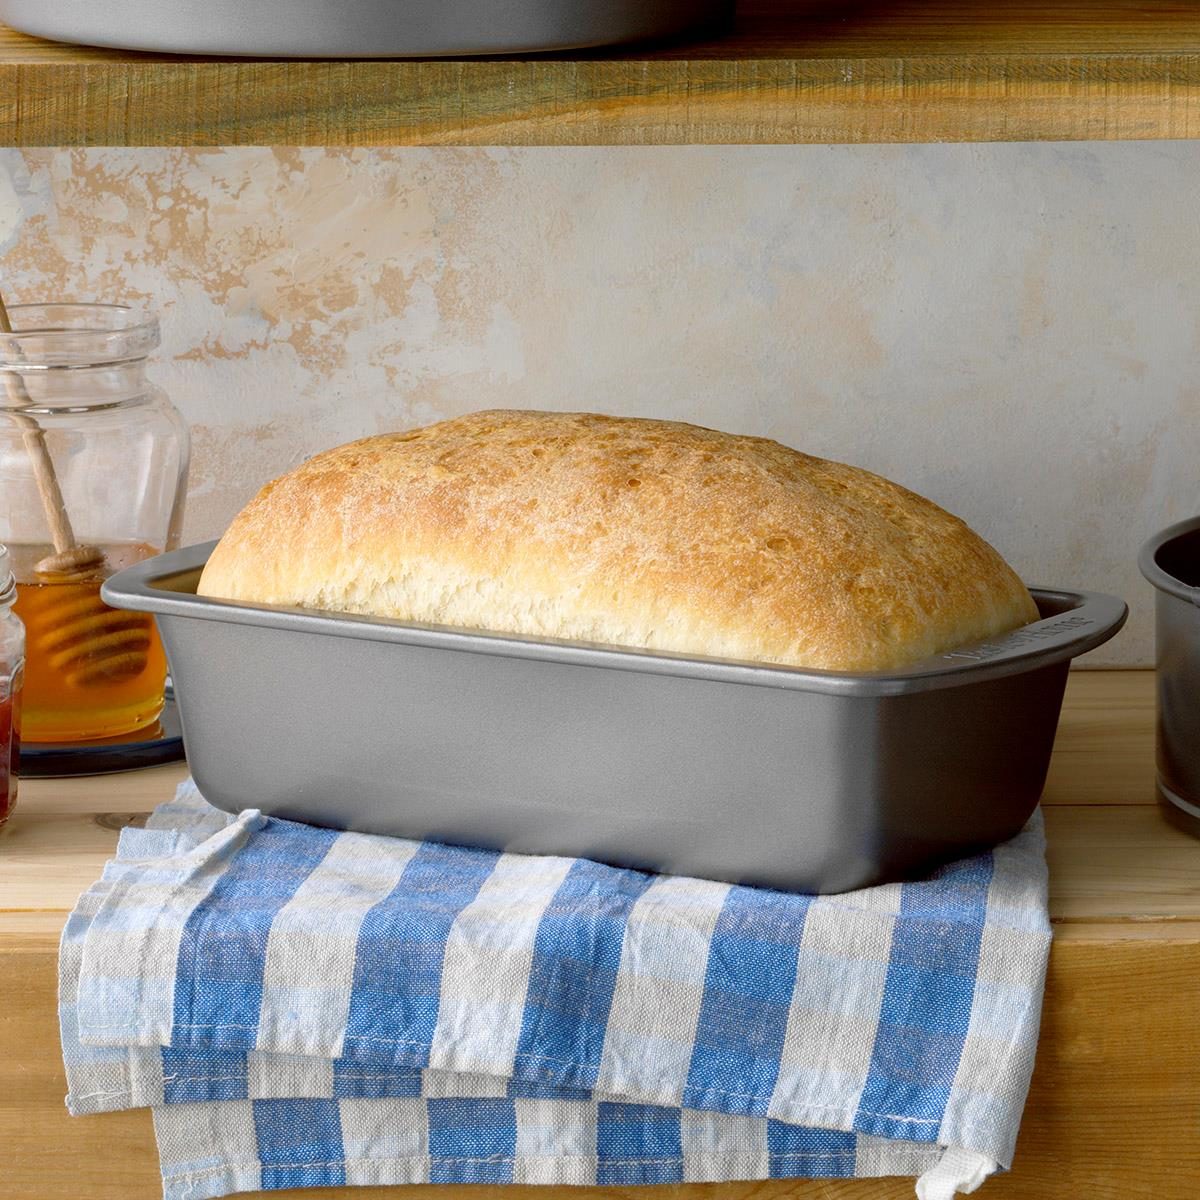 Over 50,000 People a Day Are Viewing This Bread Recipe | Reader's Digest